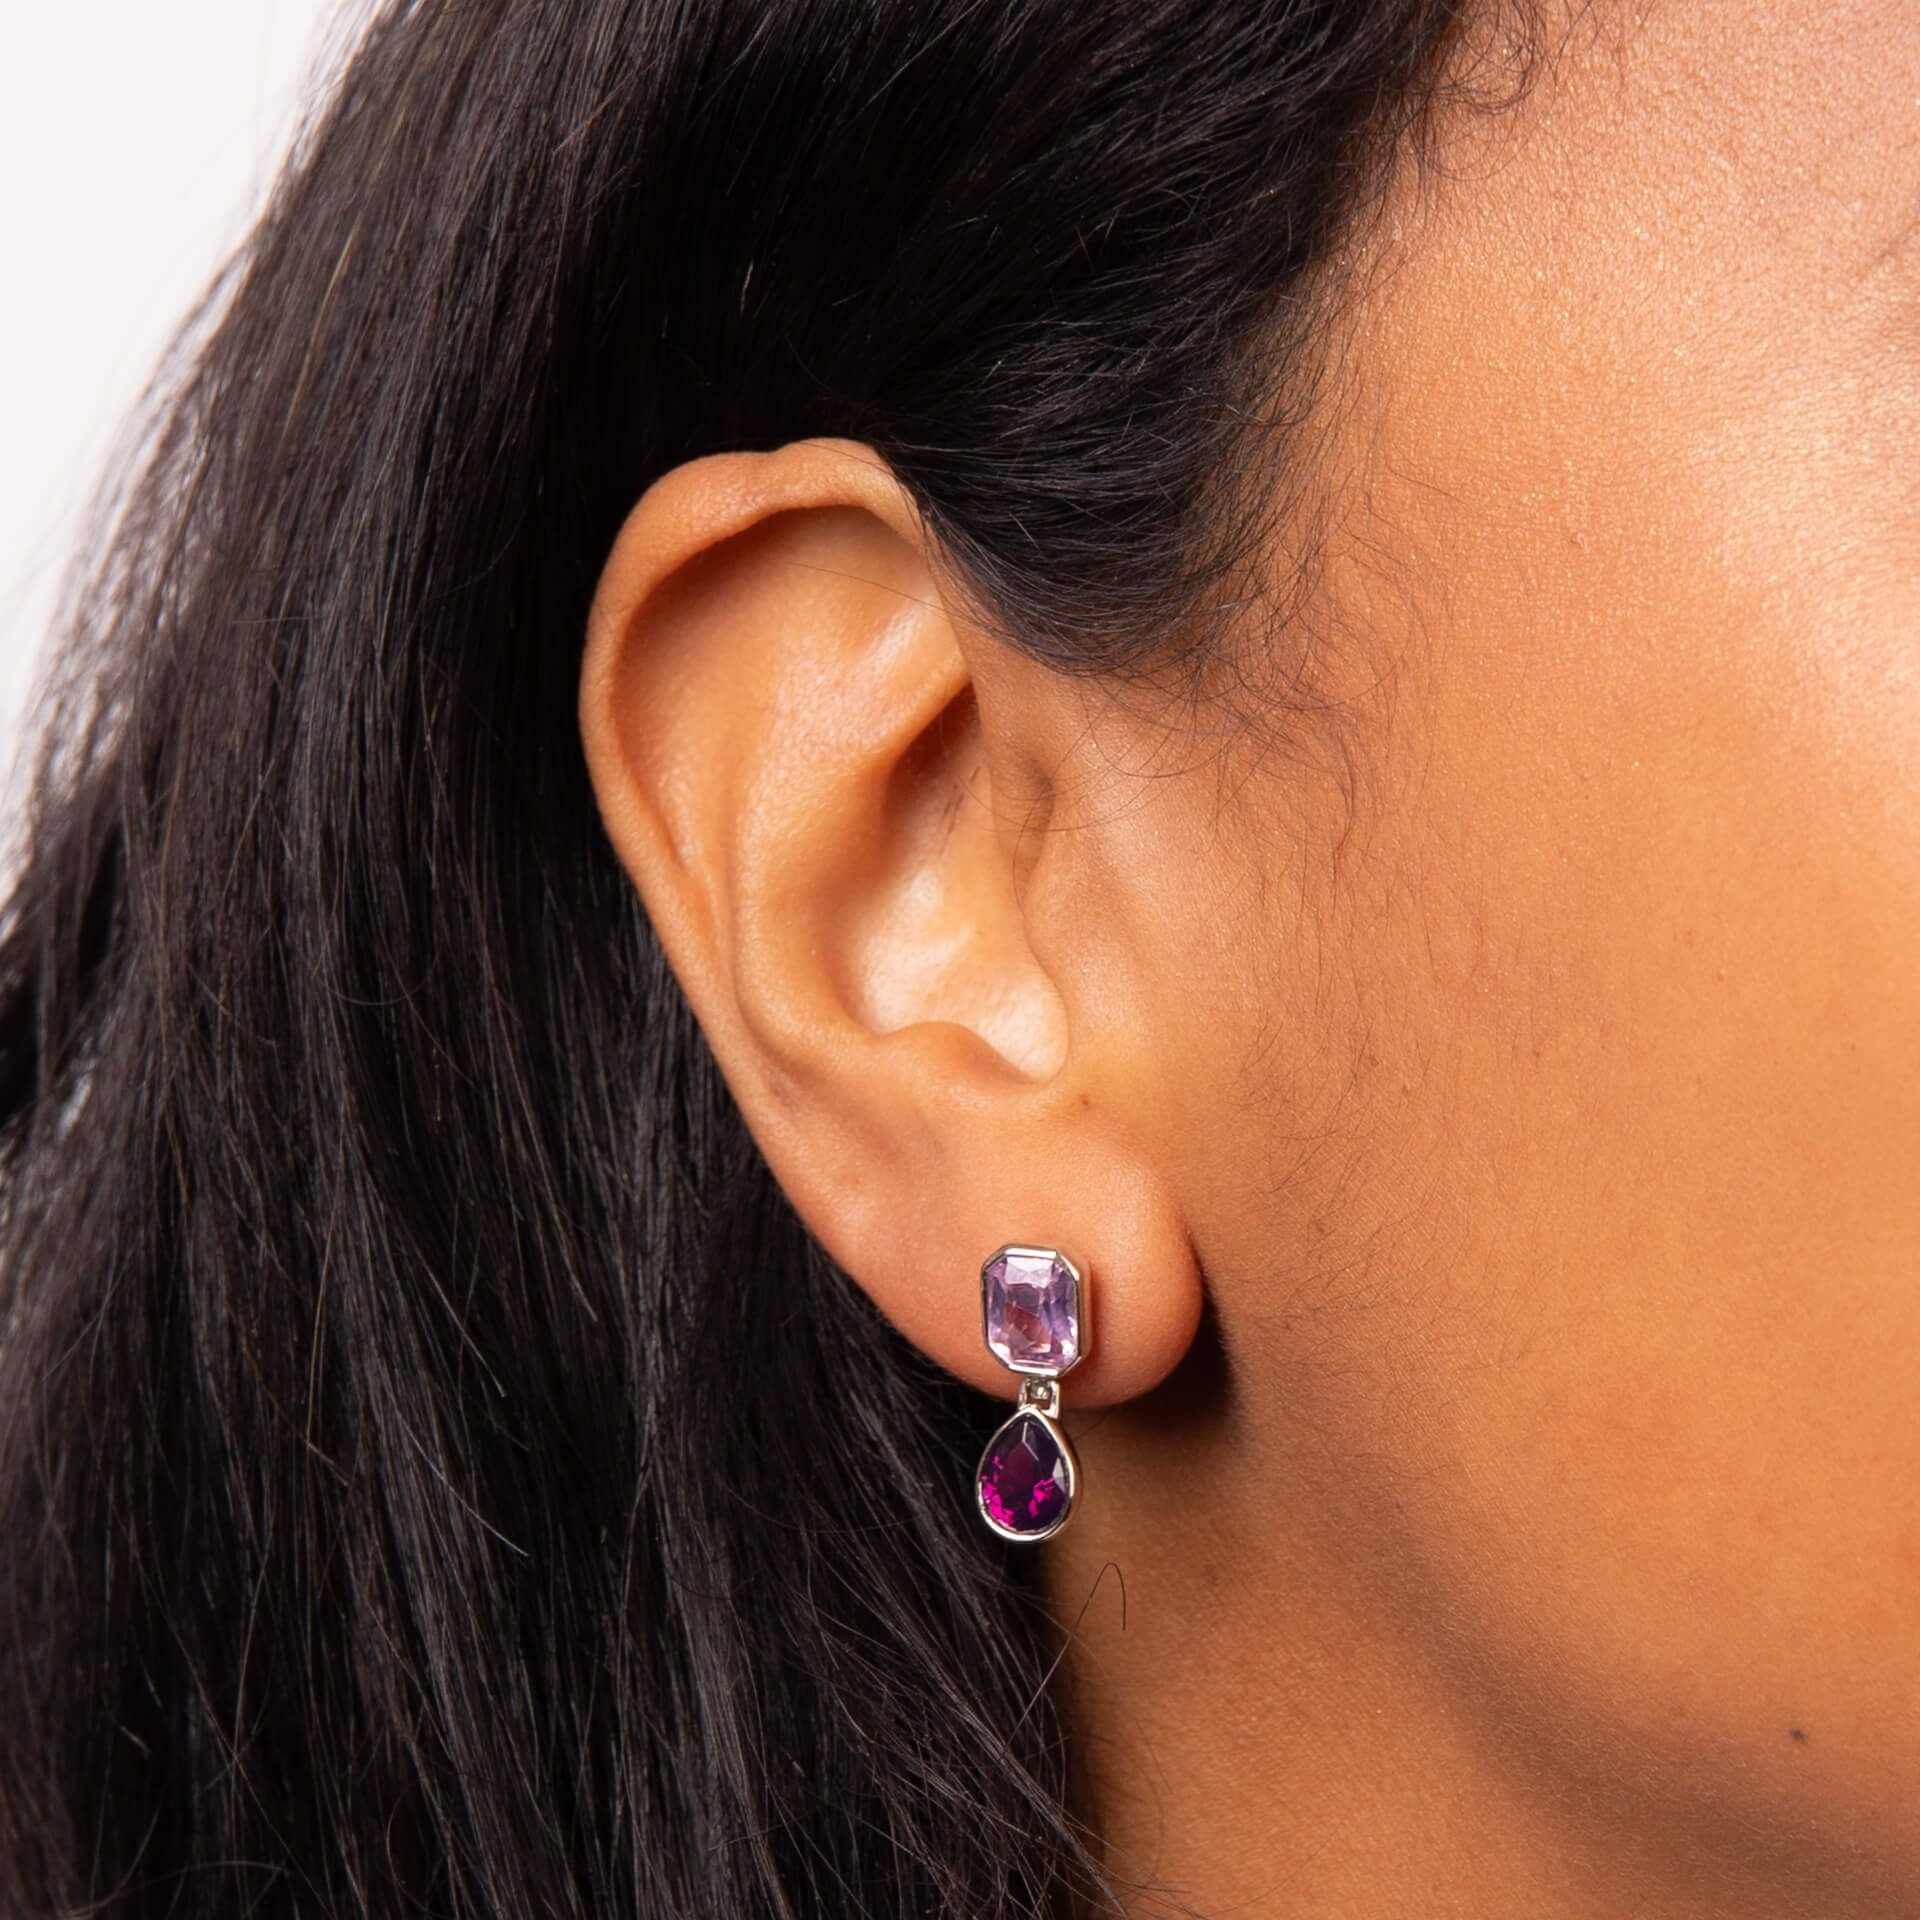 Fiorelli amethyst and pink coloured crystal double drop earrings